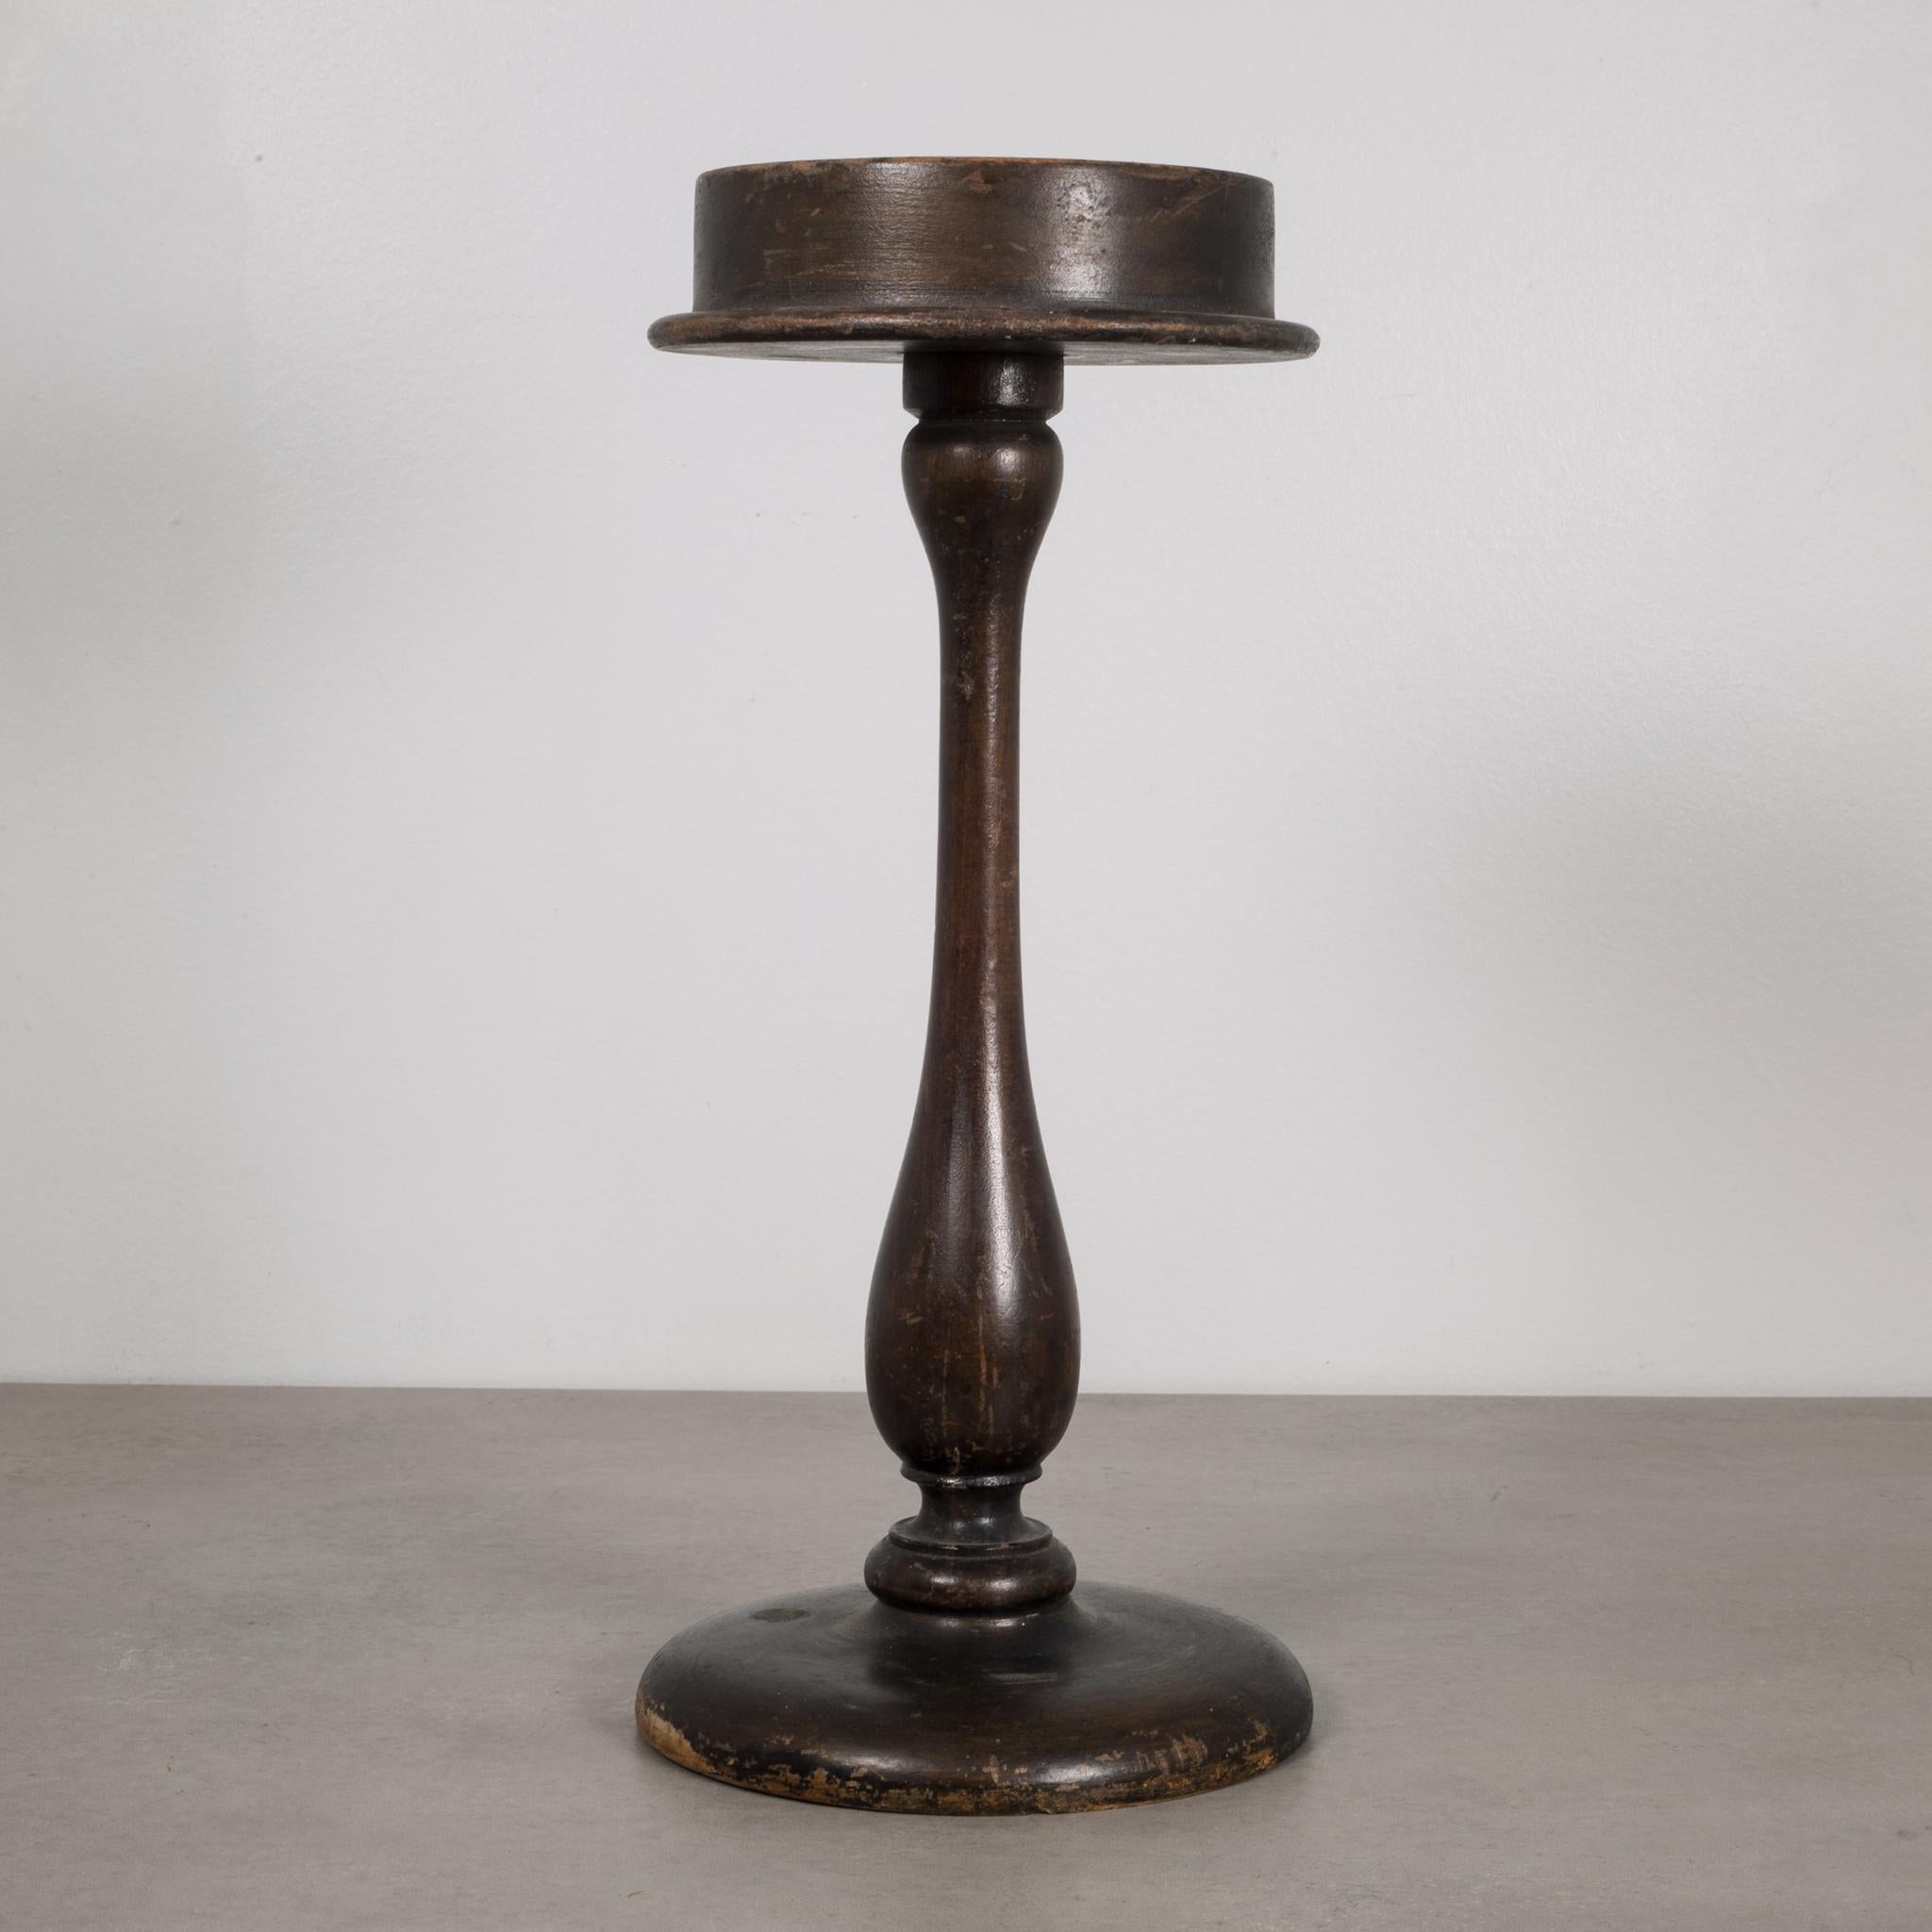 Industrial Late 19th-Early 20th Century Antique Wooden Hat Display Stand